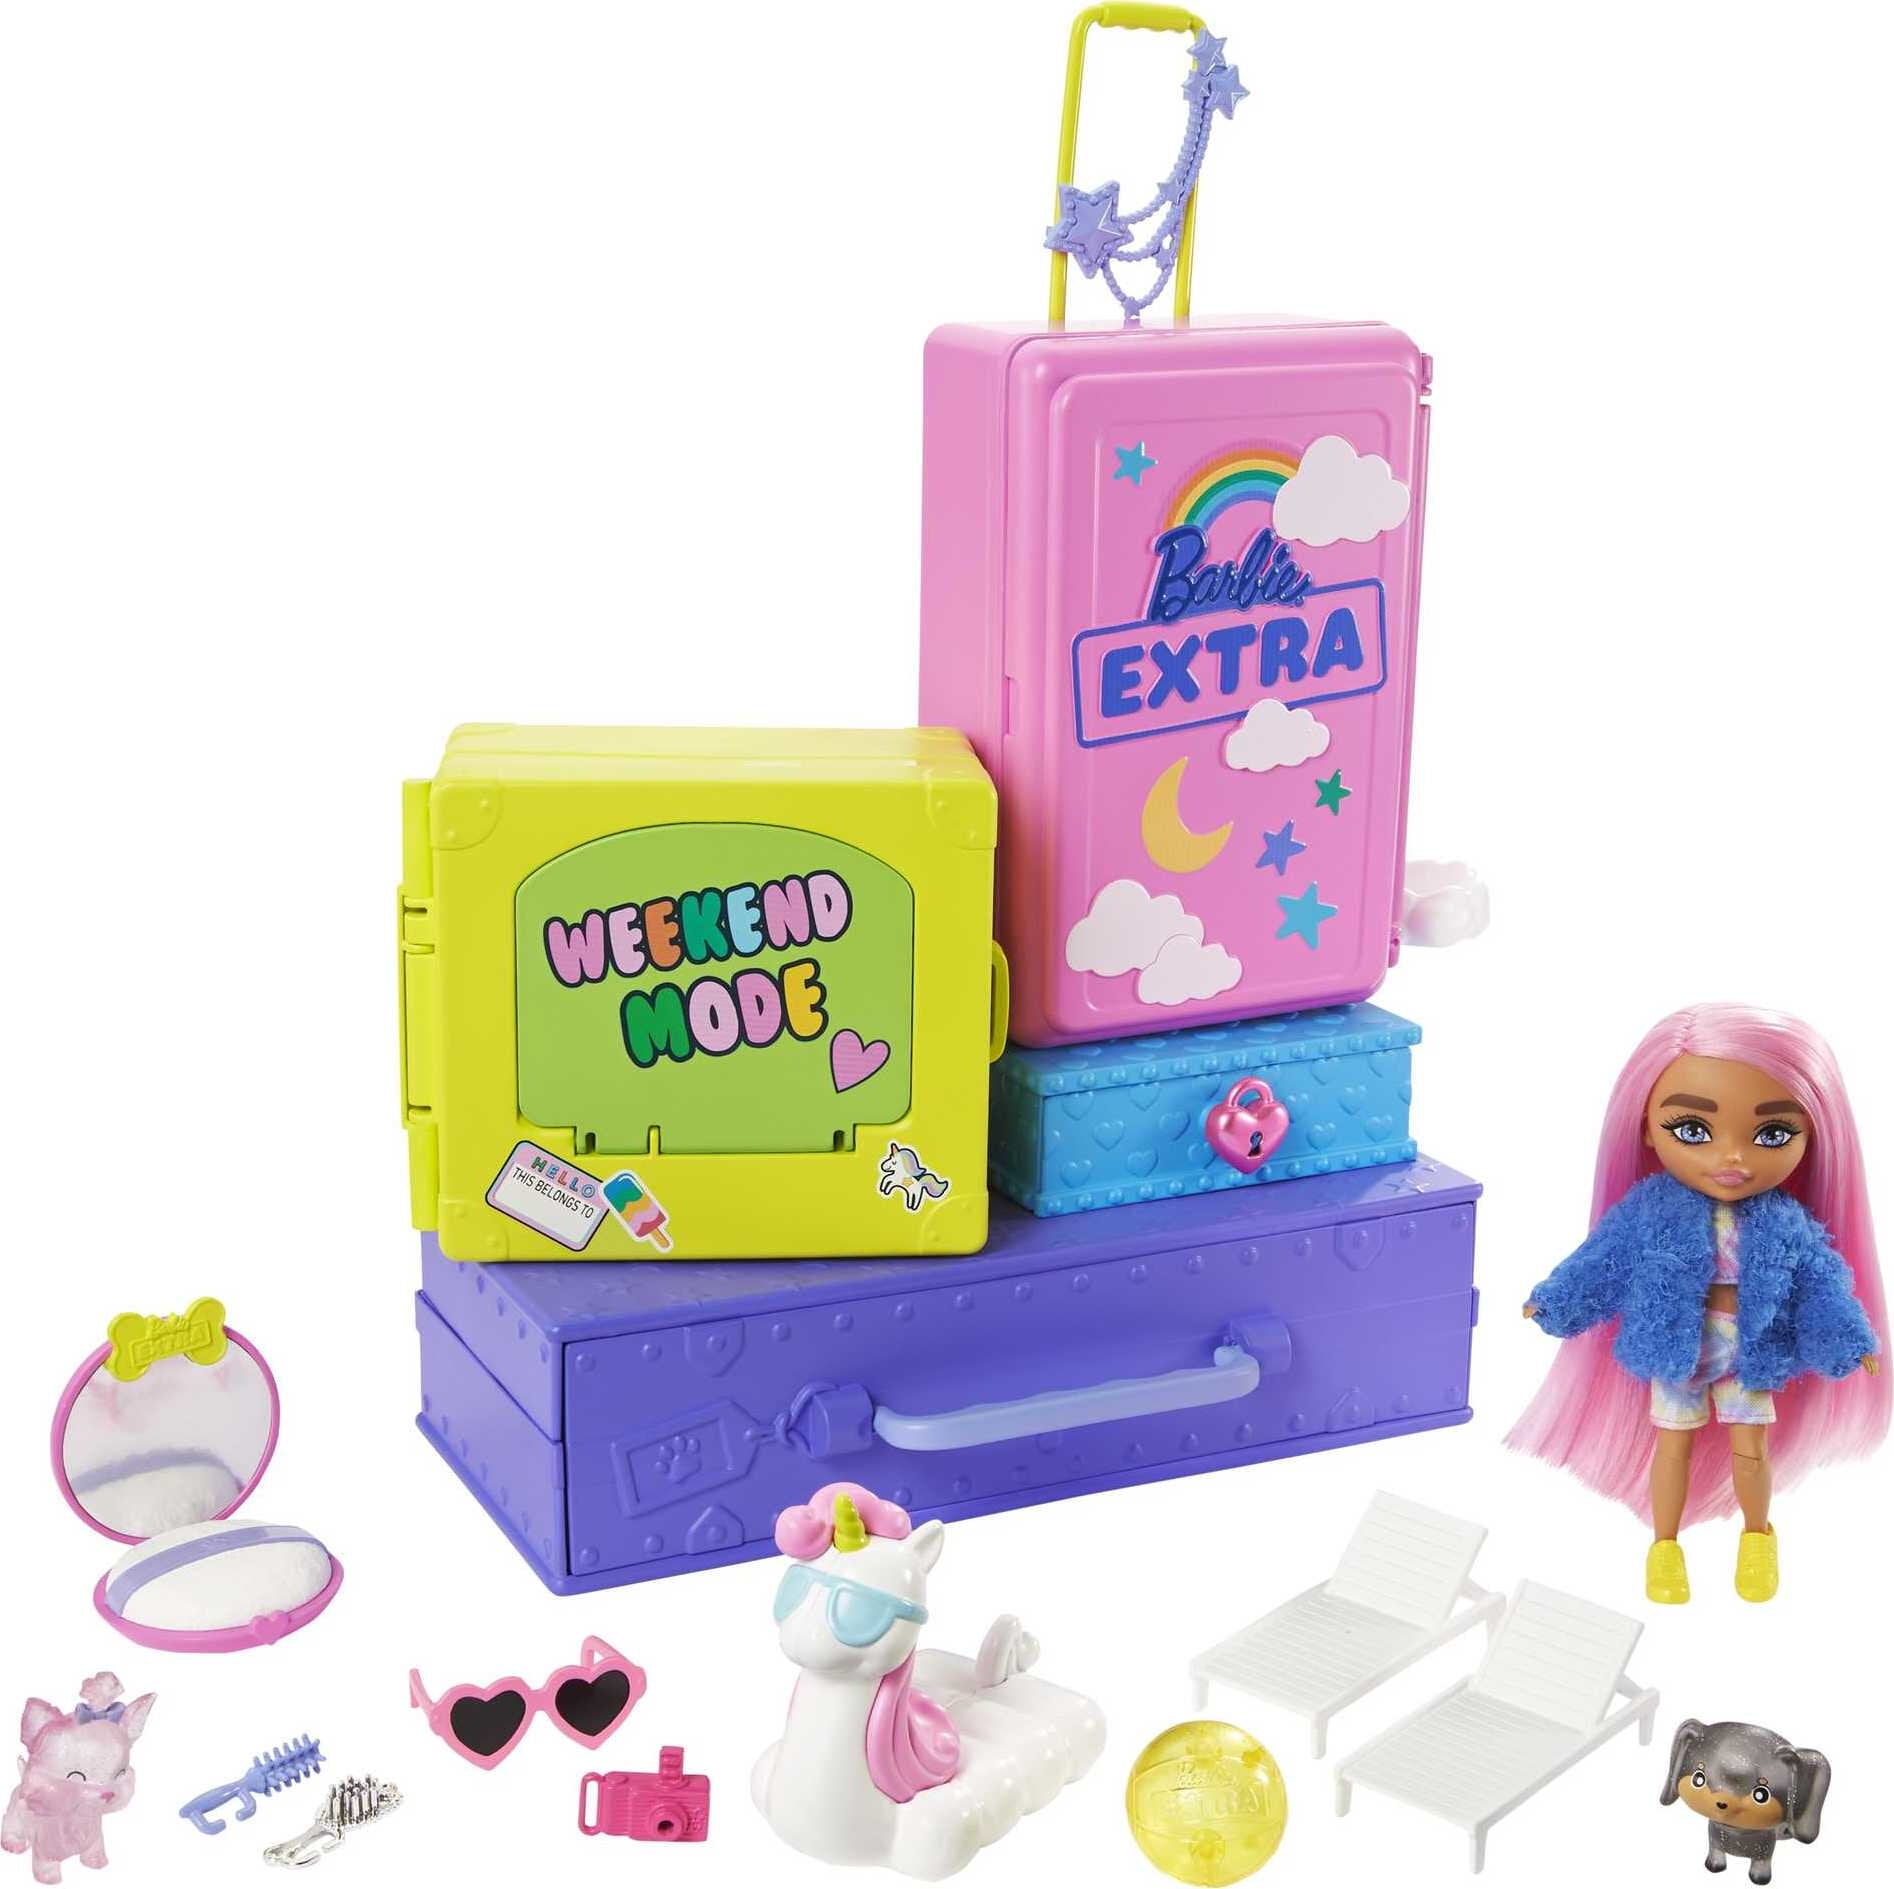 Barbie Extra Minis Pet Dollhouse, Travel Party Playset with Doll, Puppies & Accessories $9.21 + Free S&H w/ Walmart+ or $35+